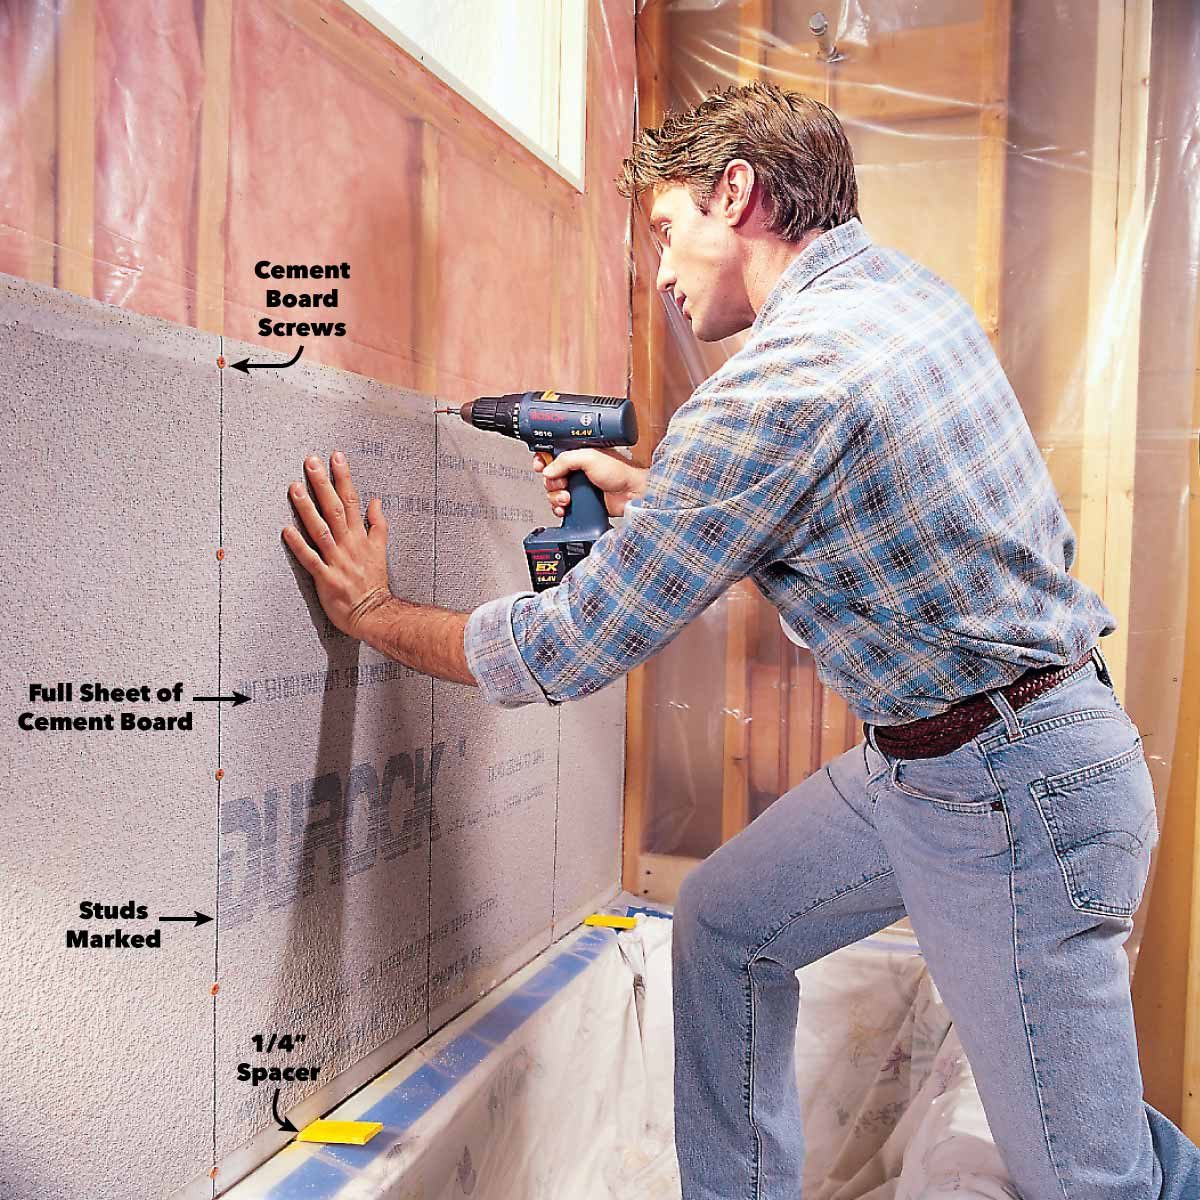 How to Install Cement Board for Tile Projects | Family Handyman